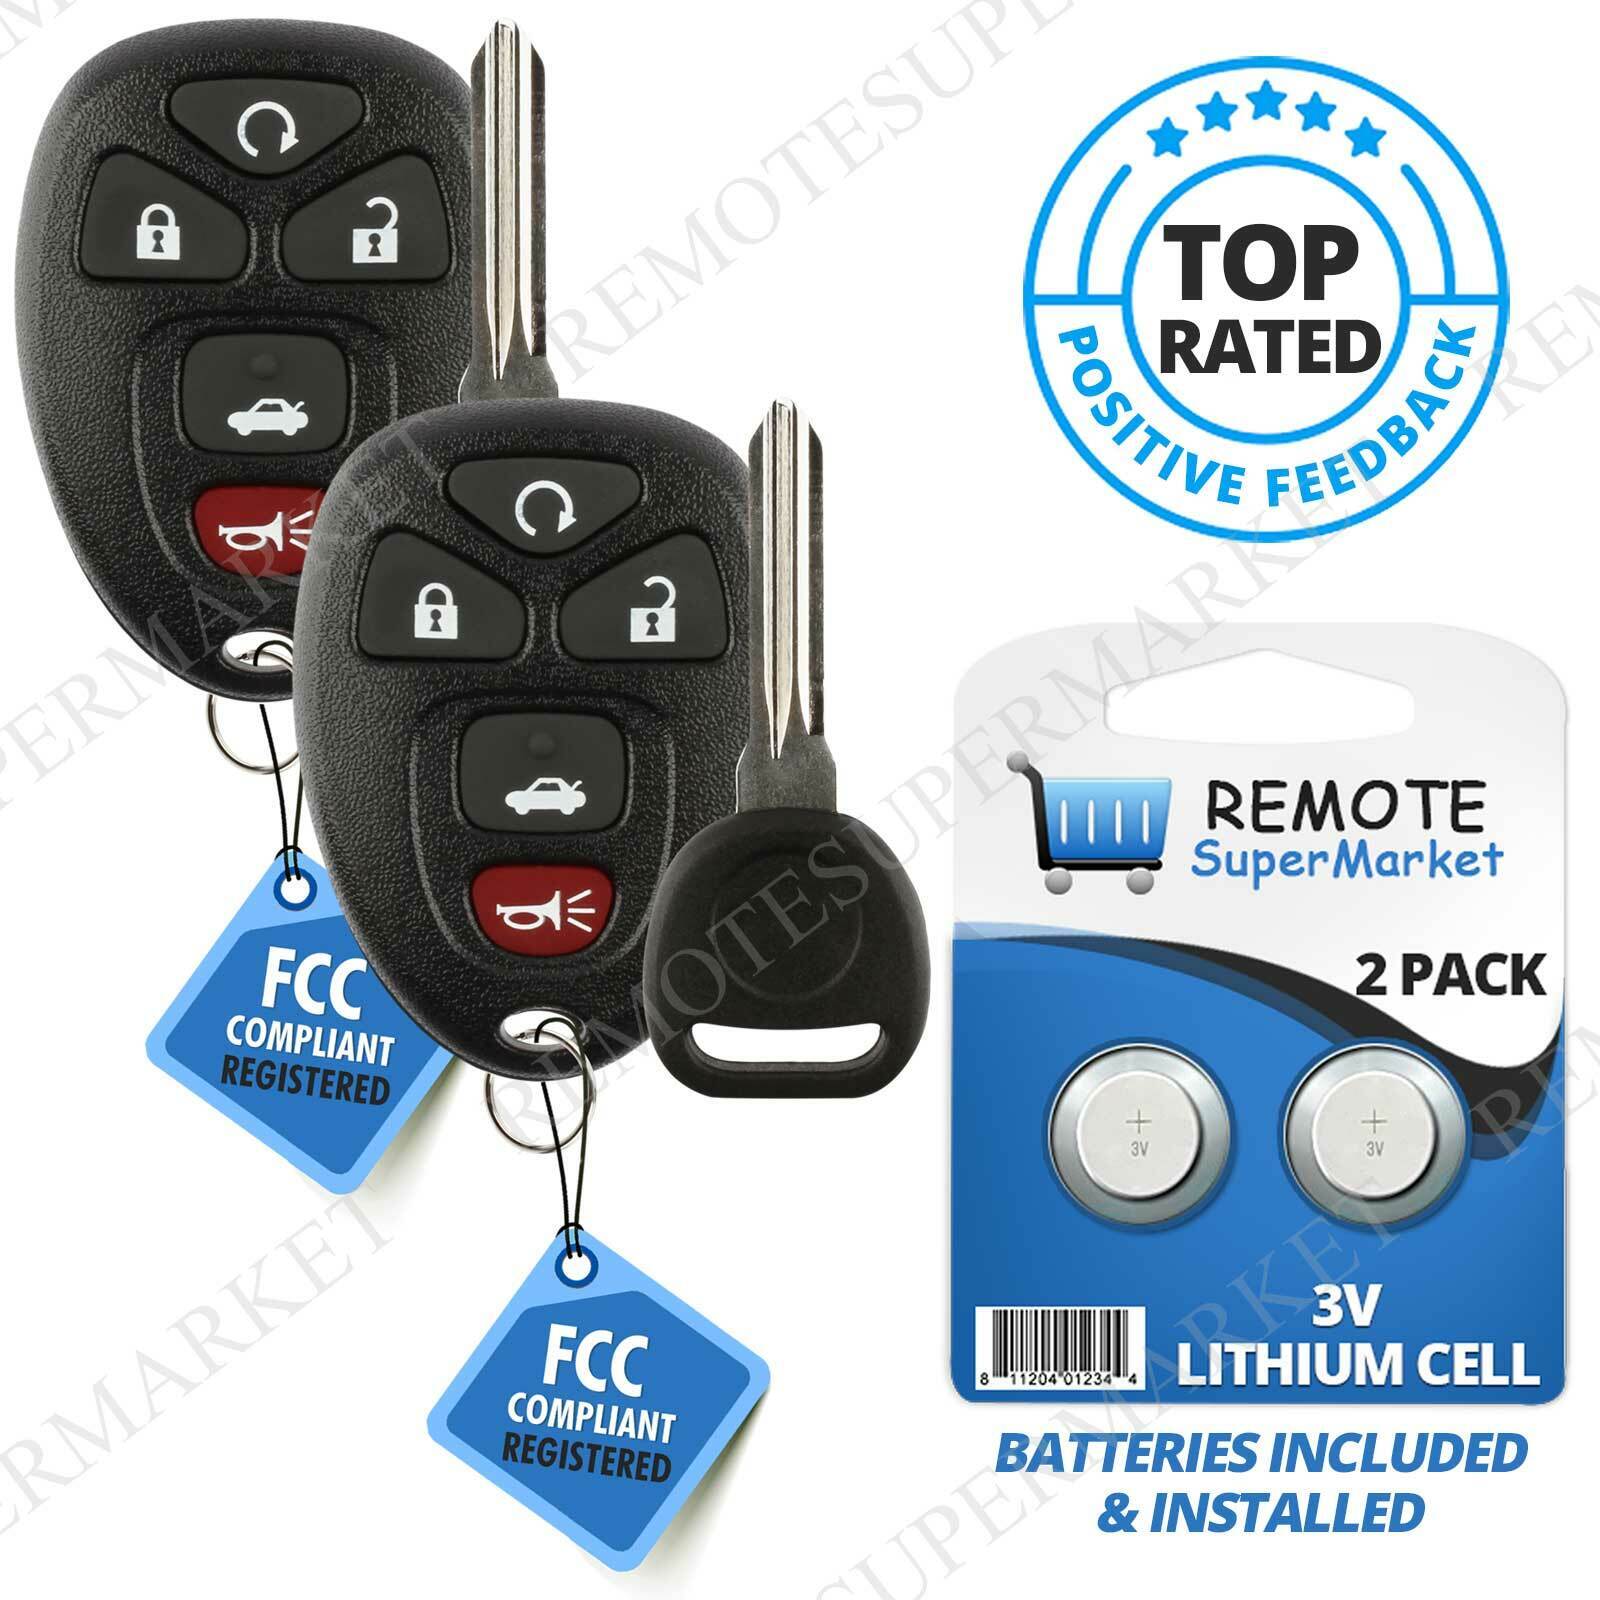 2 Replacement for 2006-2013 Chevy Impala 06-07 Monte Carlo Remote Key Fob 5b Set